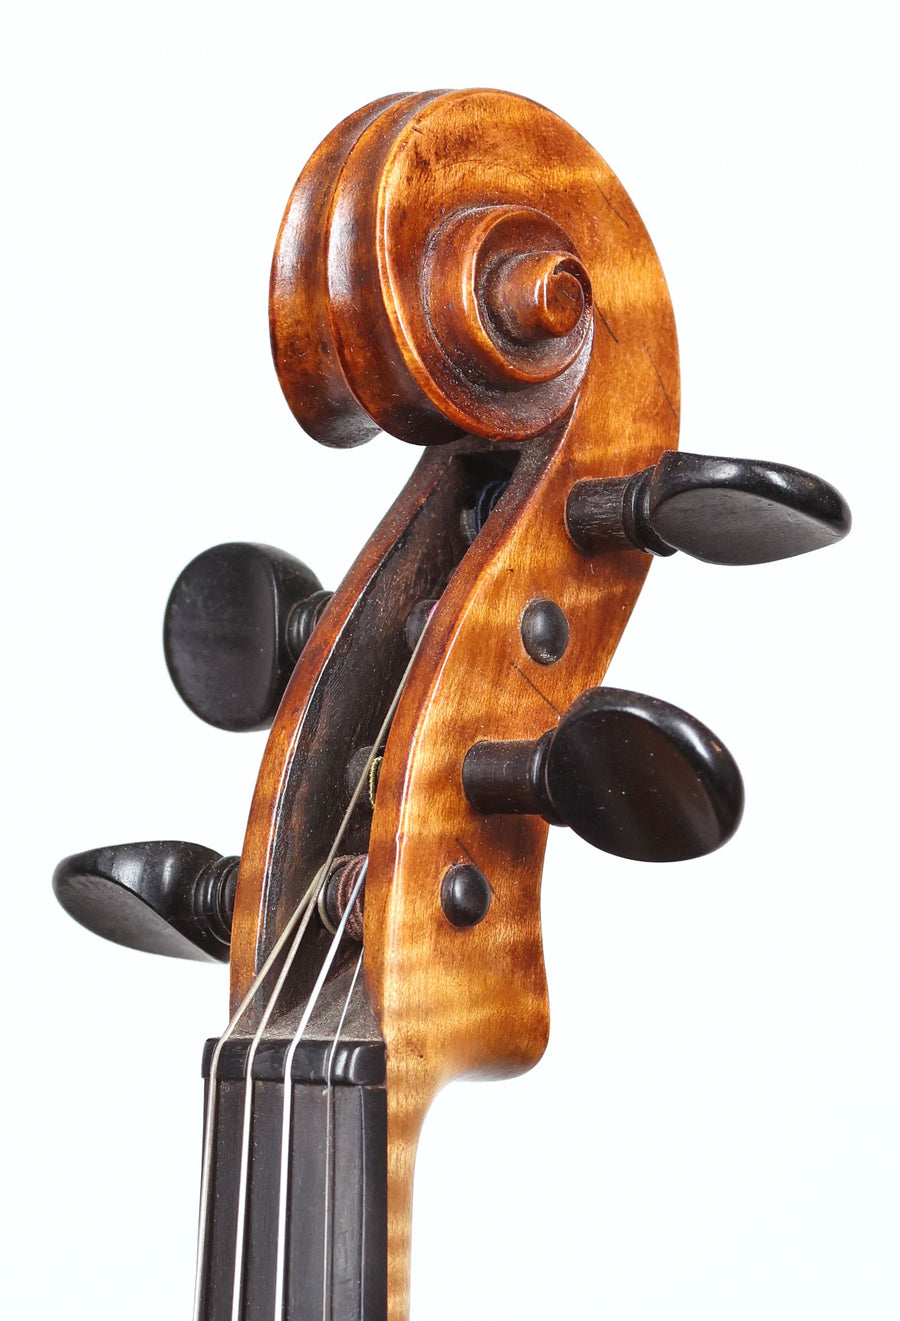 Violin #49 by Dudley Reed, 1950